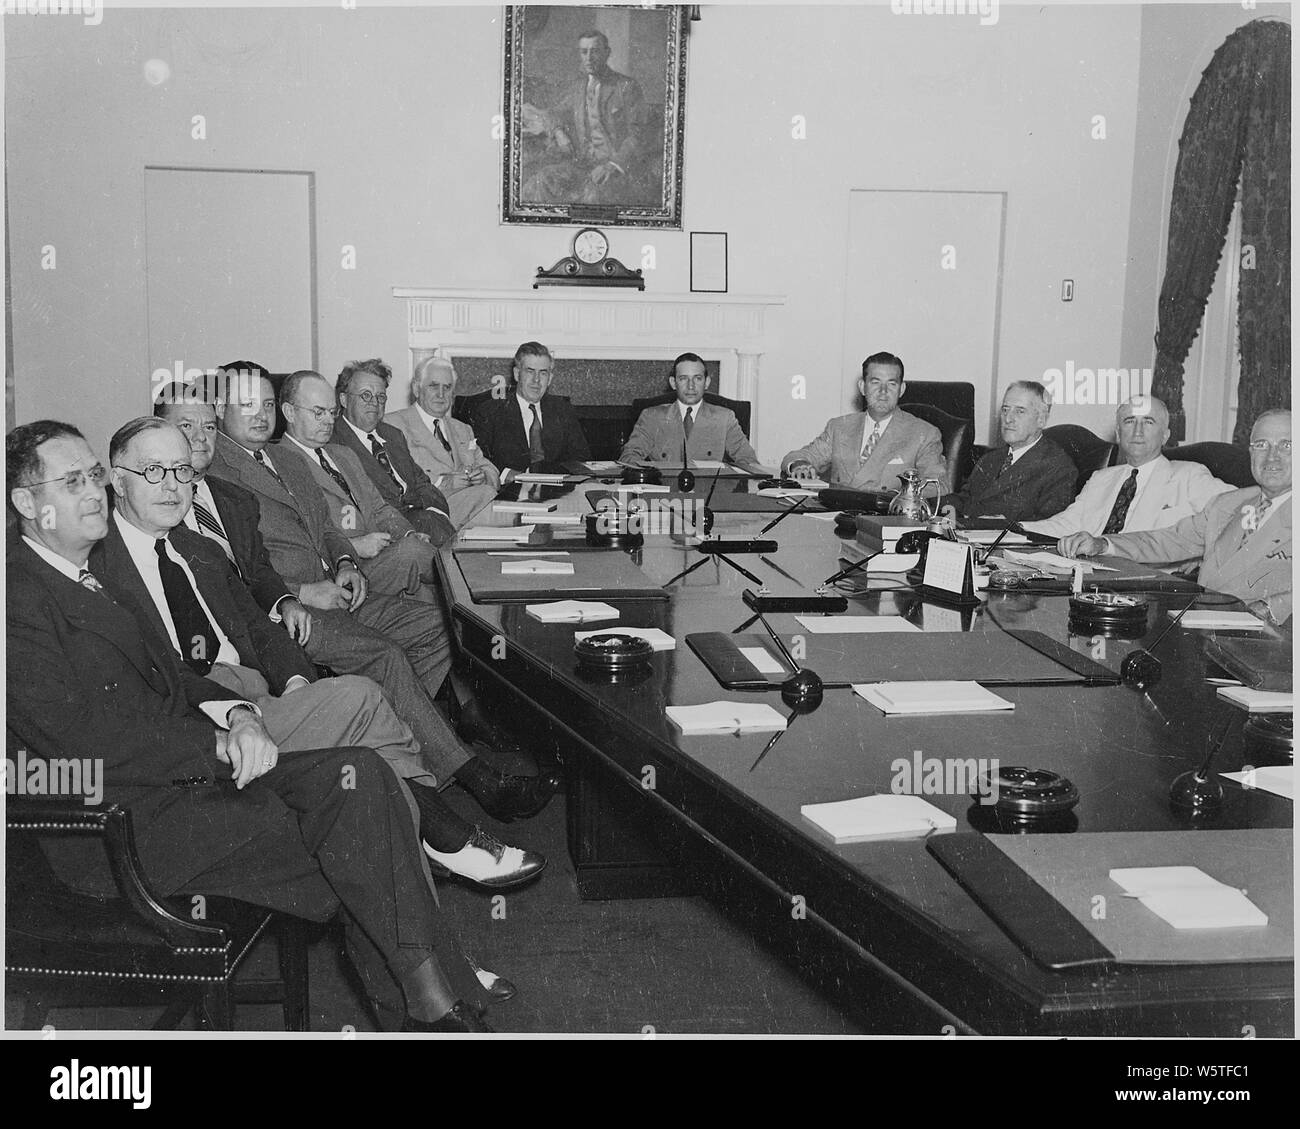 Photograph Of Cabinet Meeting At The White House From Left To